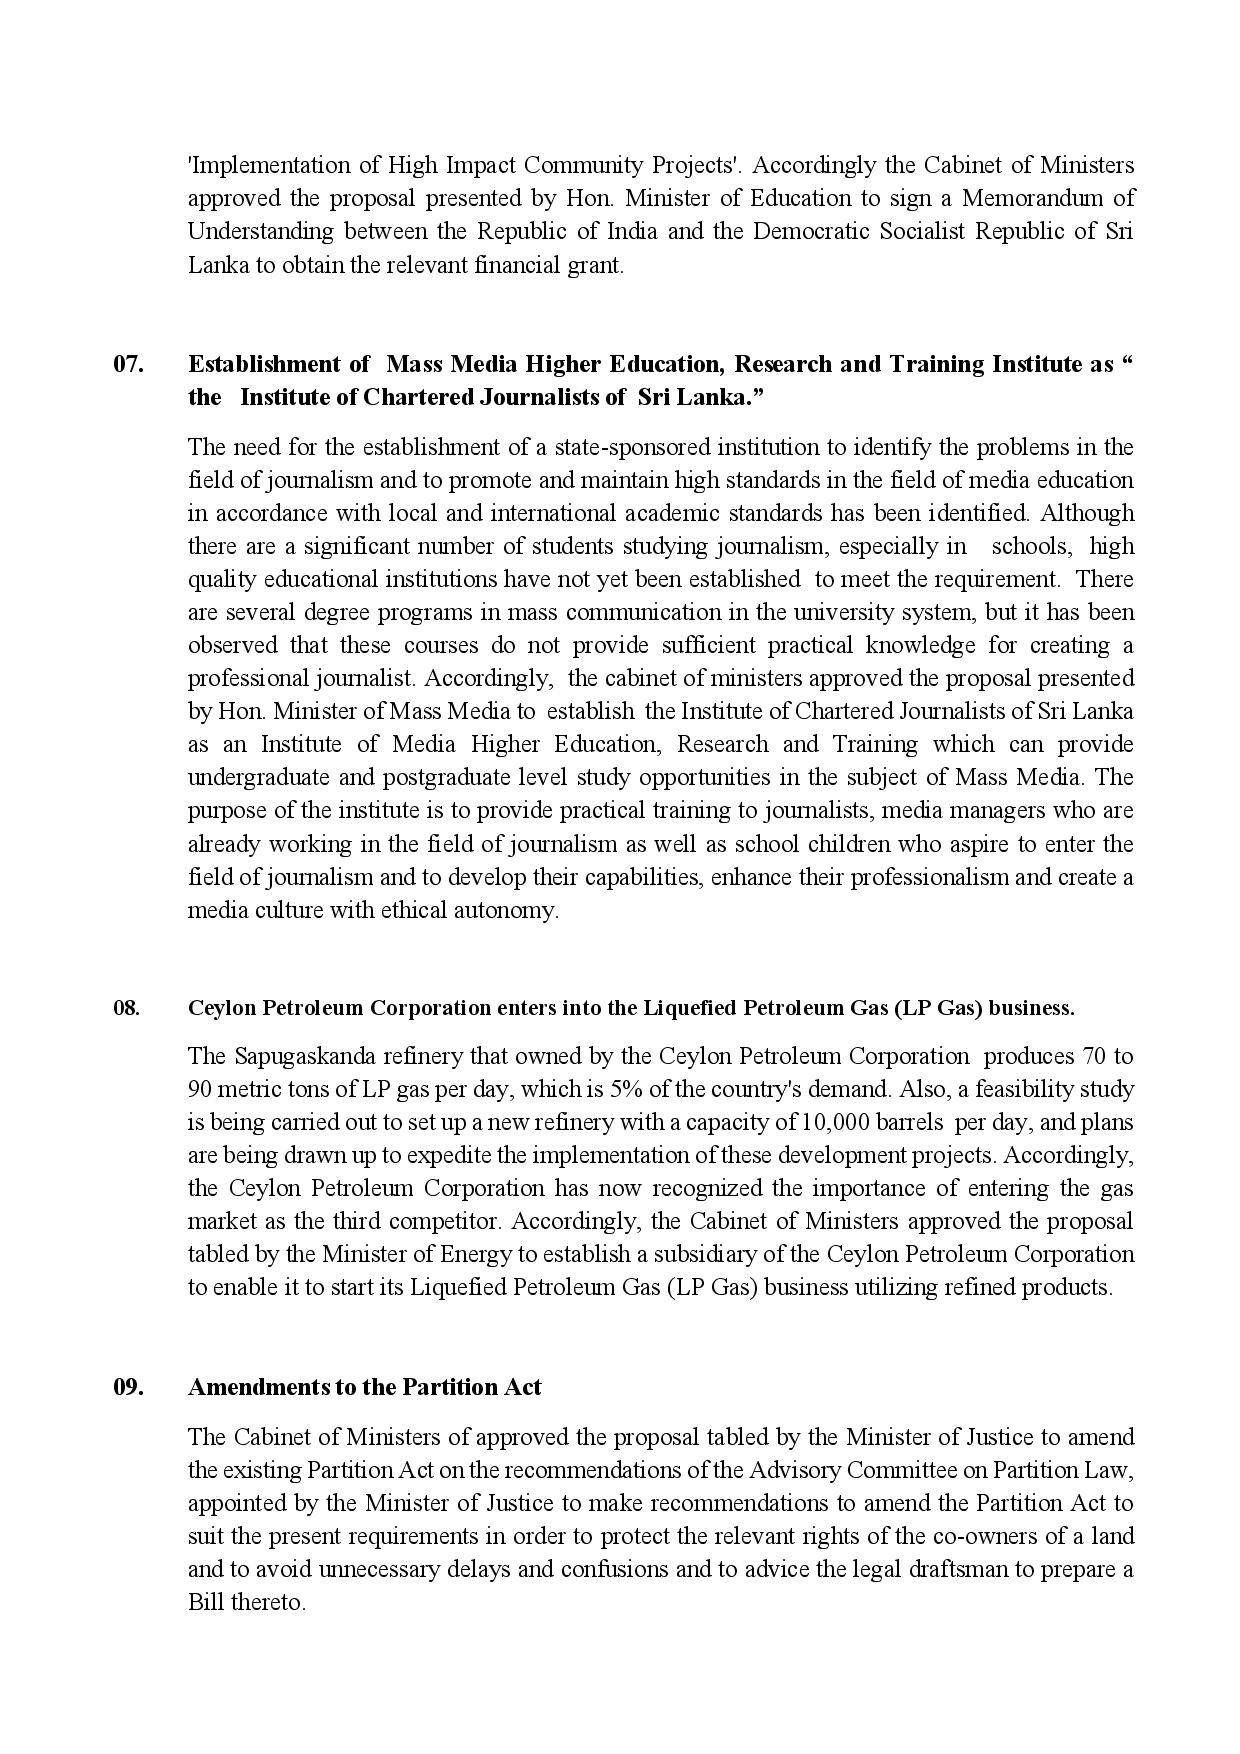 Cabinet Decisions on 05.10.2021 English page 003